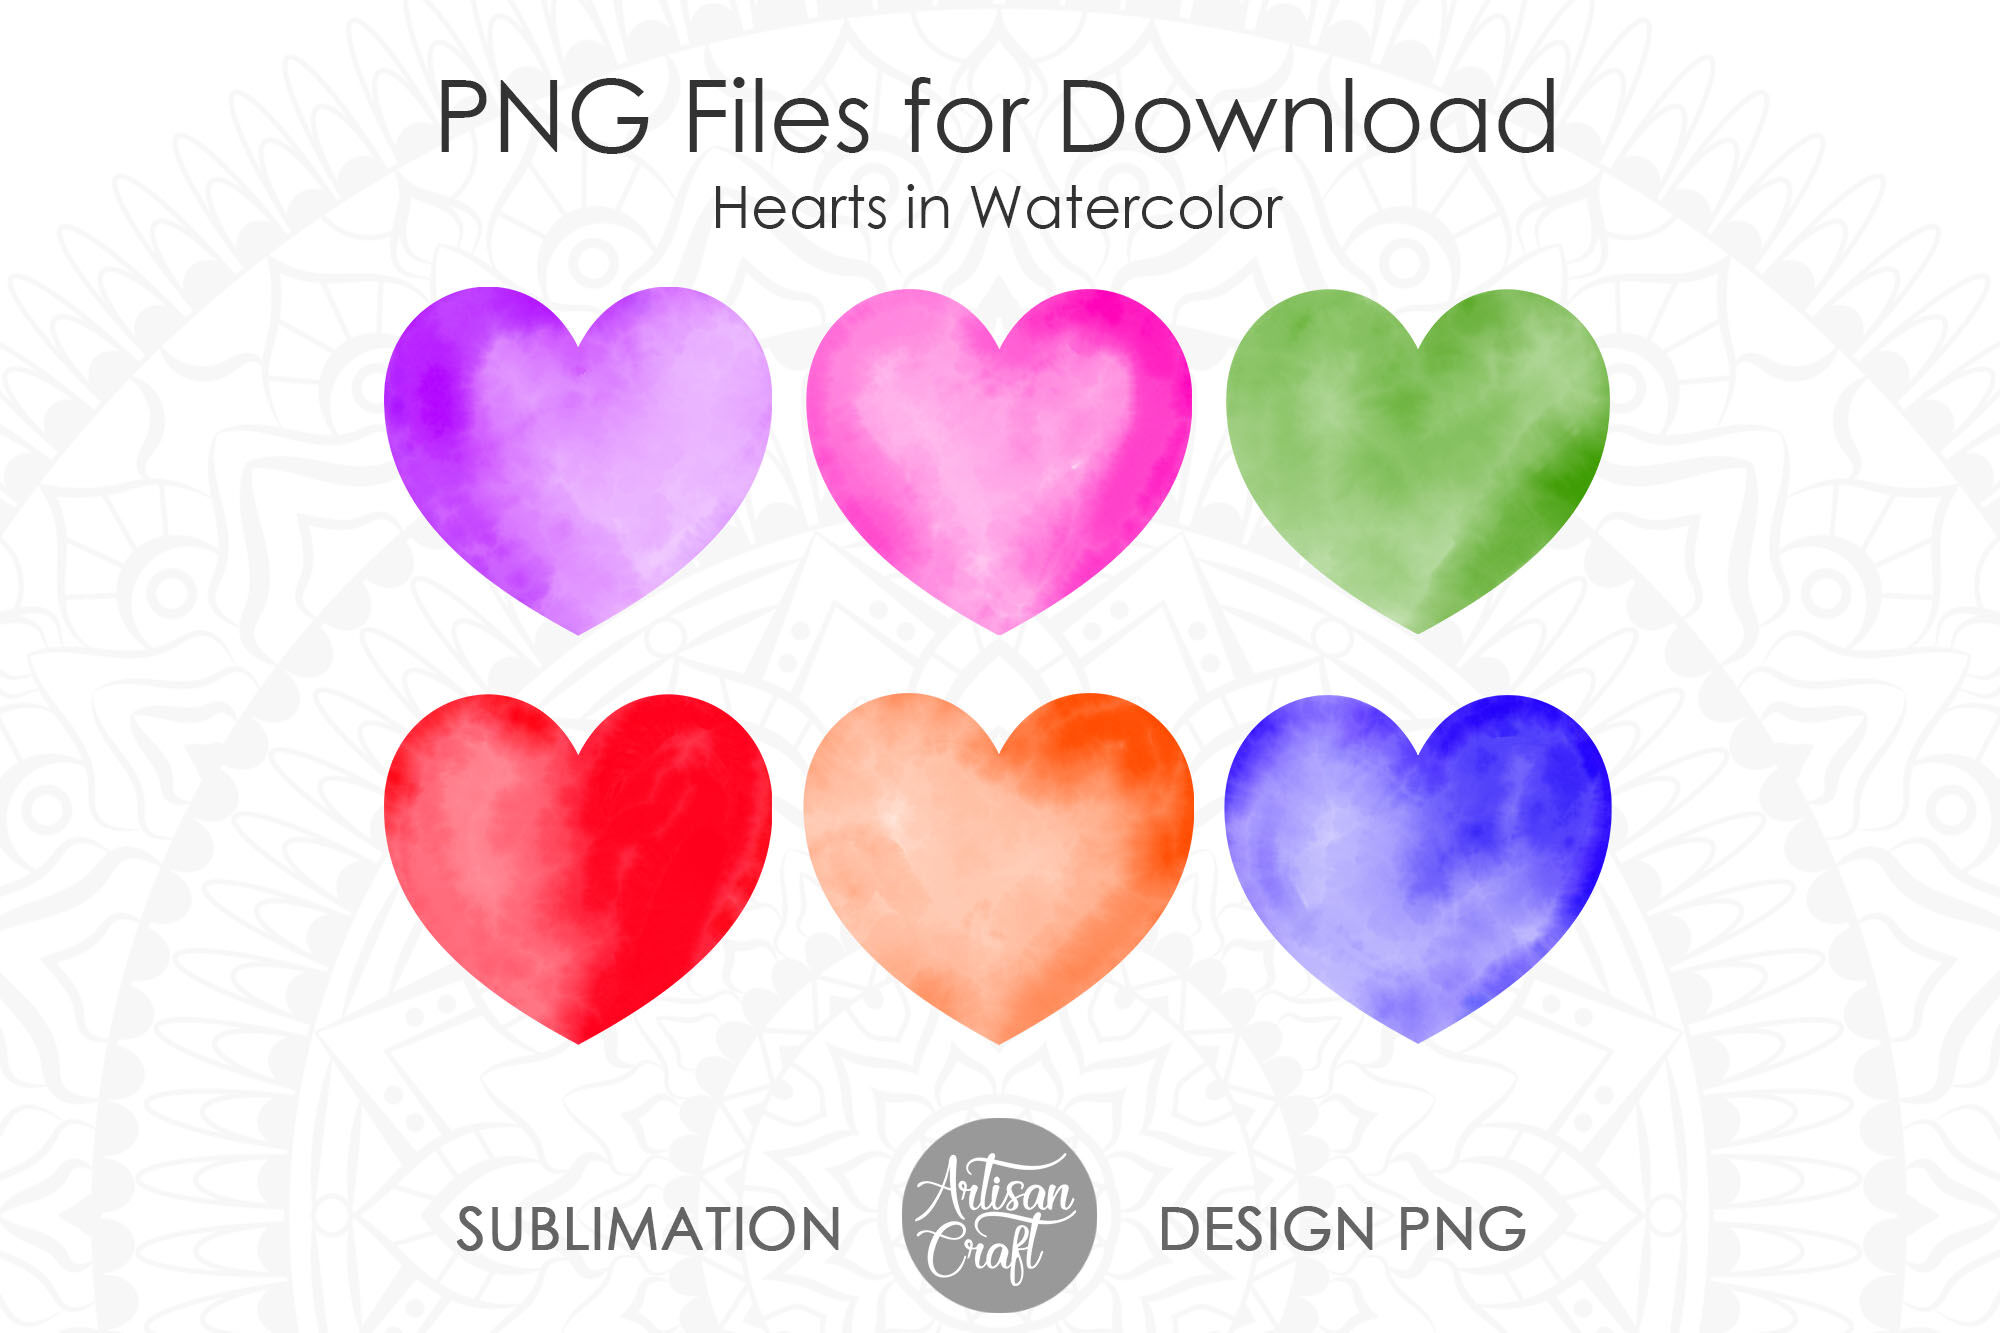 Download Watercolor Hearts Leopard Print Heart Glitter By Artisan Craft Svg Thehungryjpeg Com